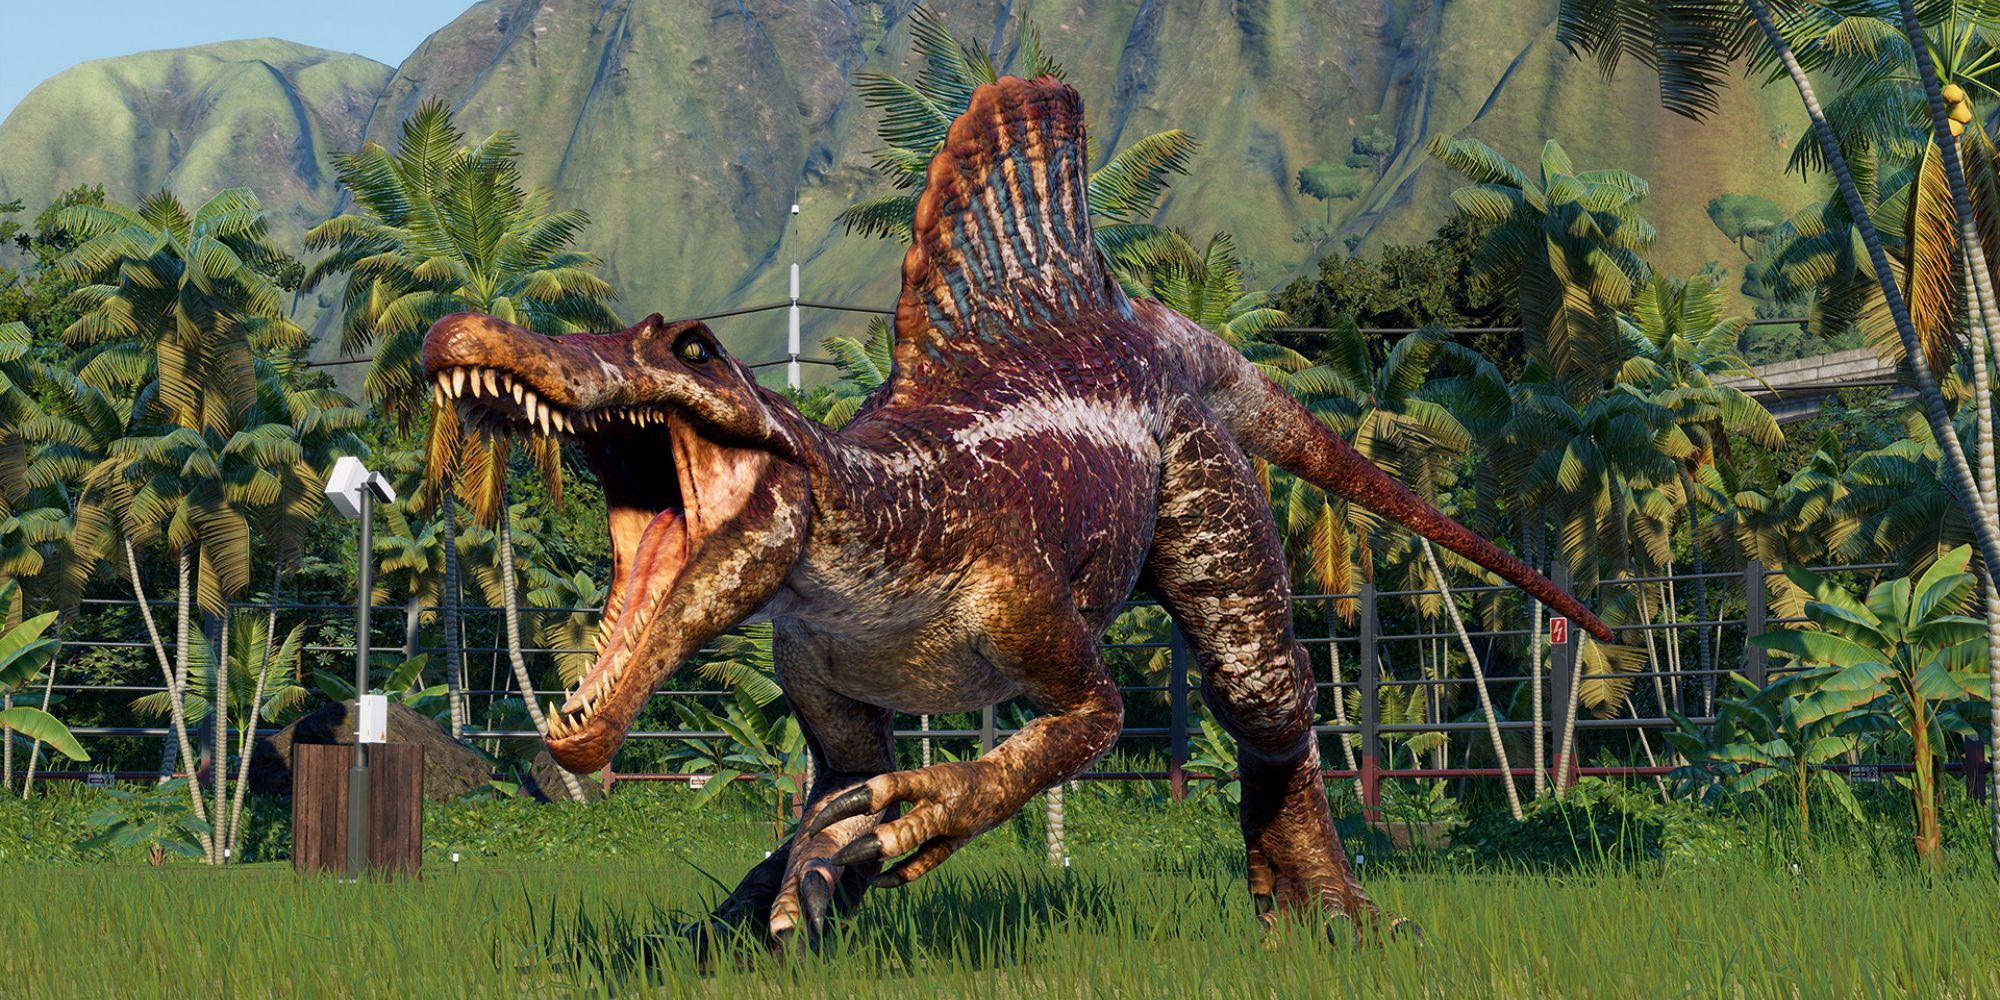 a mid shot of a dinosaur from Jurassic World Evolution 2 with its mouth wide open roaring with tropical trees and a mountain in the background